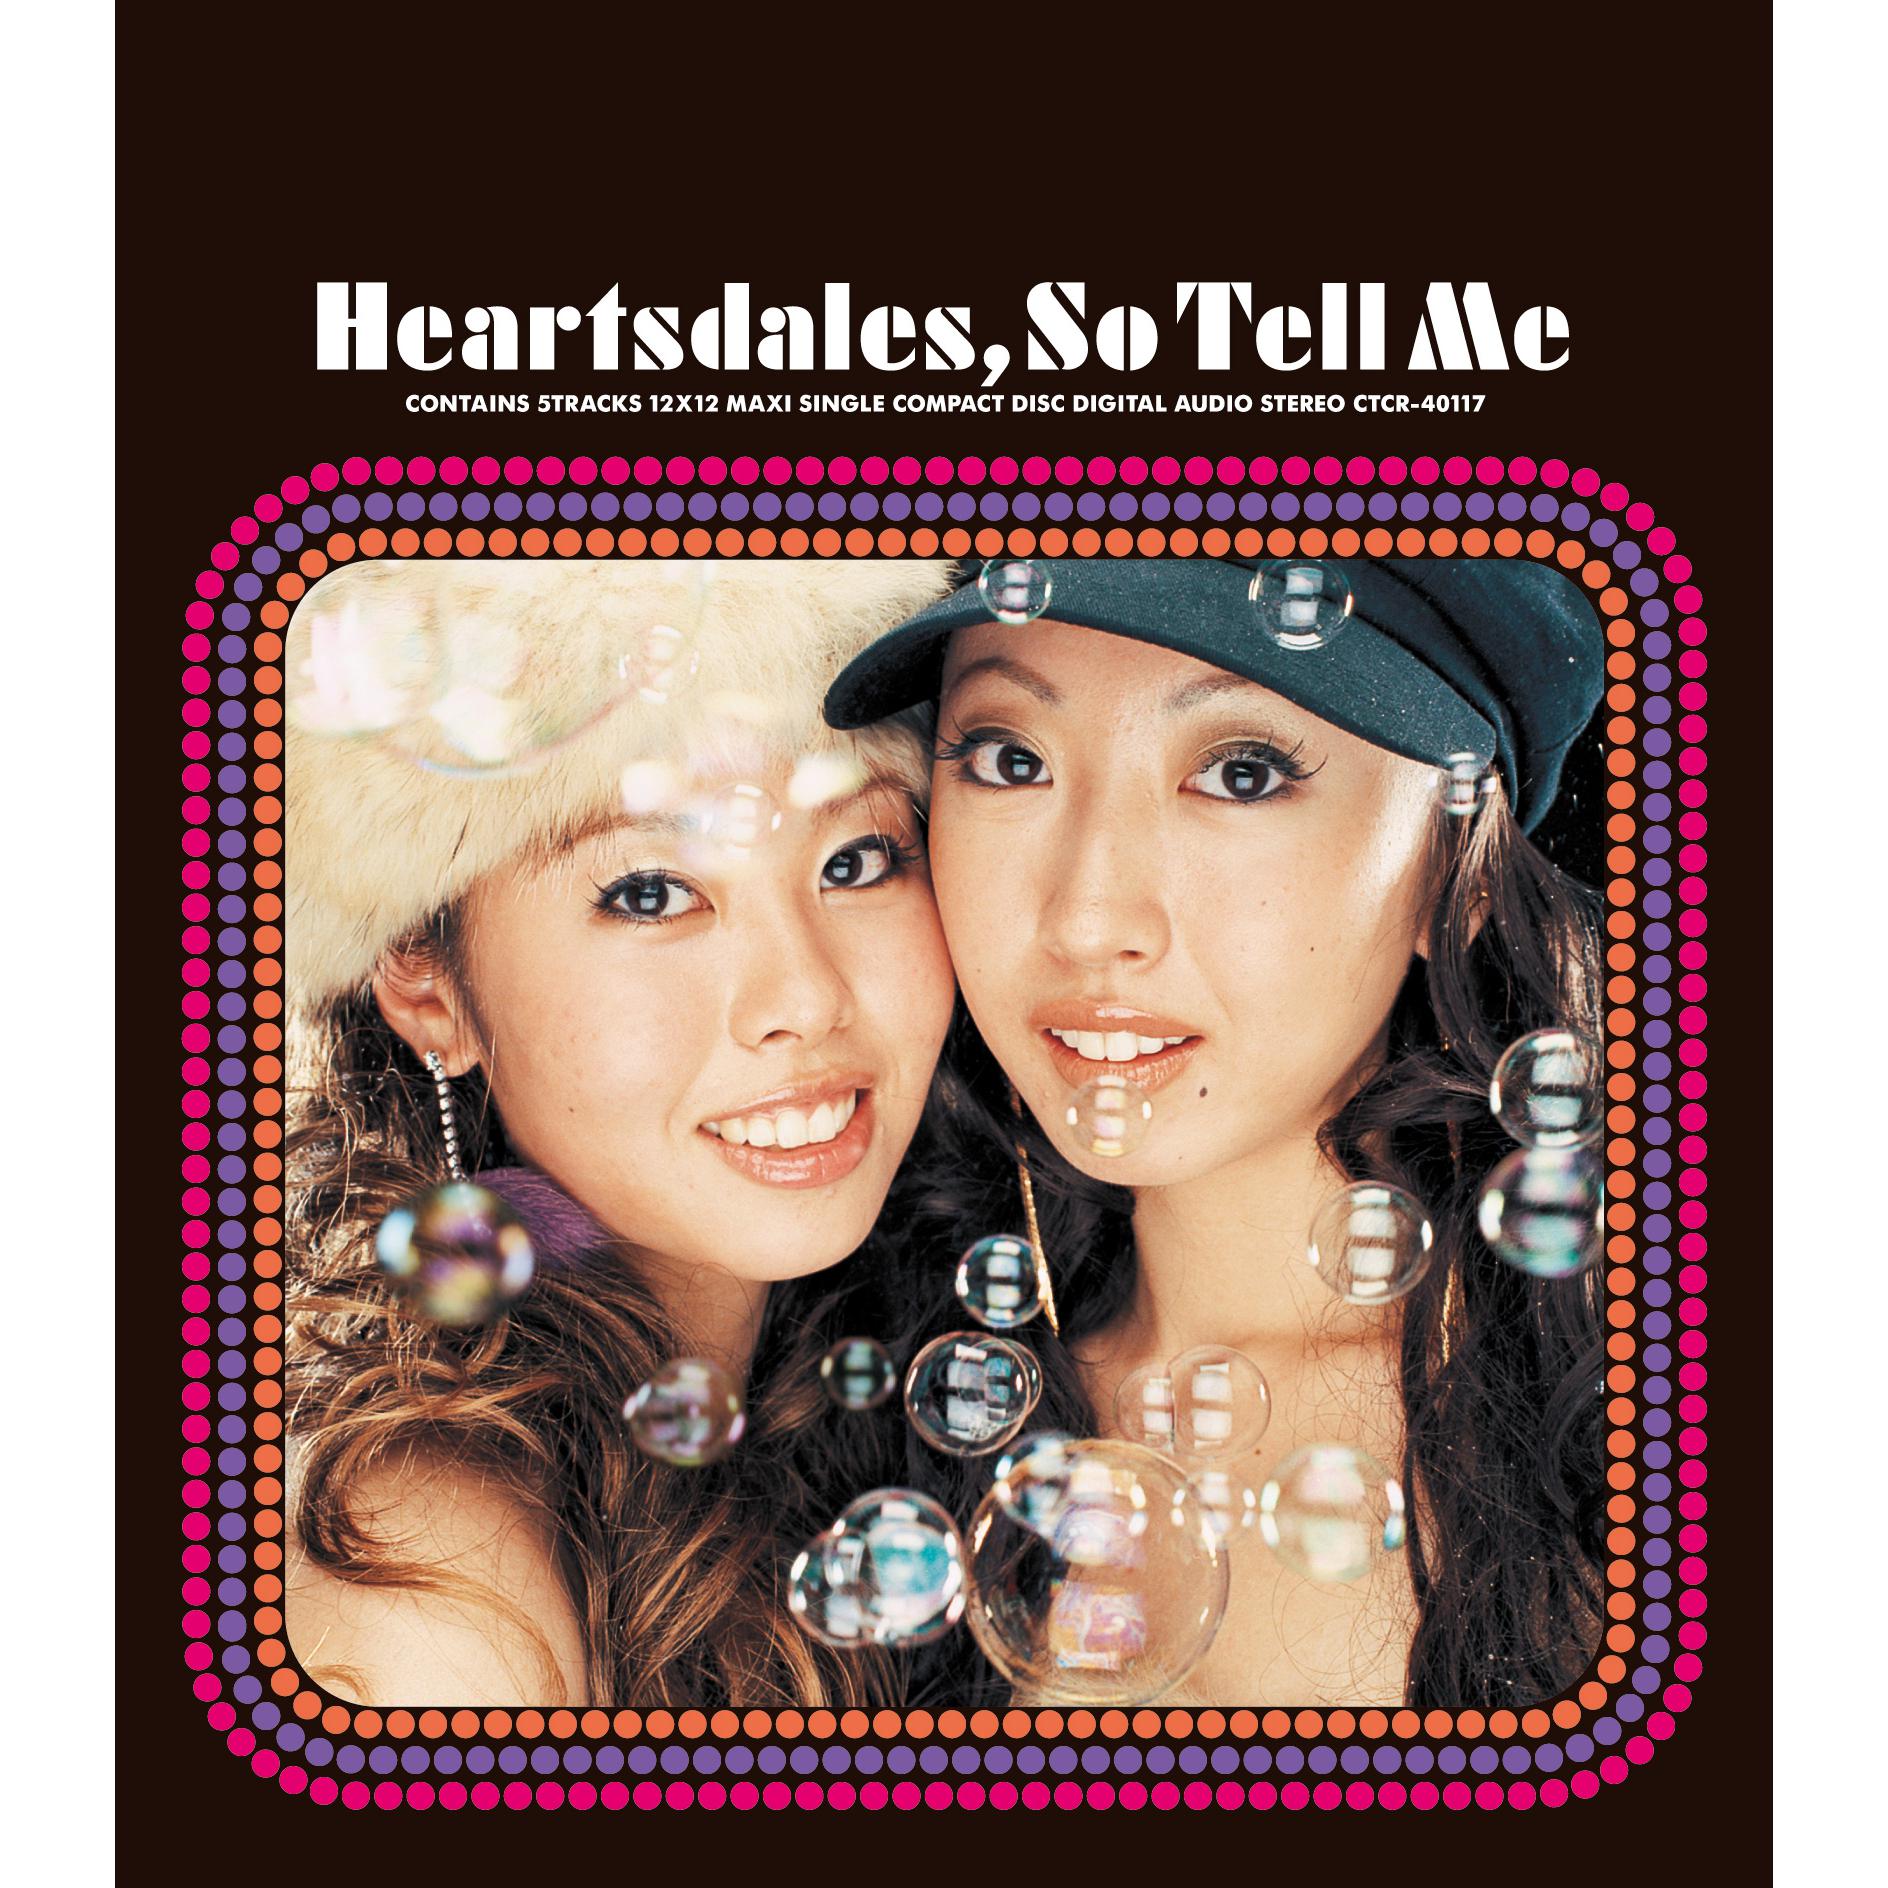 Heartsdales - So Tell Me